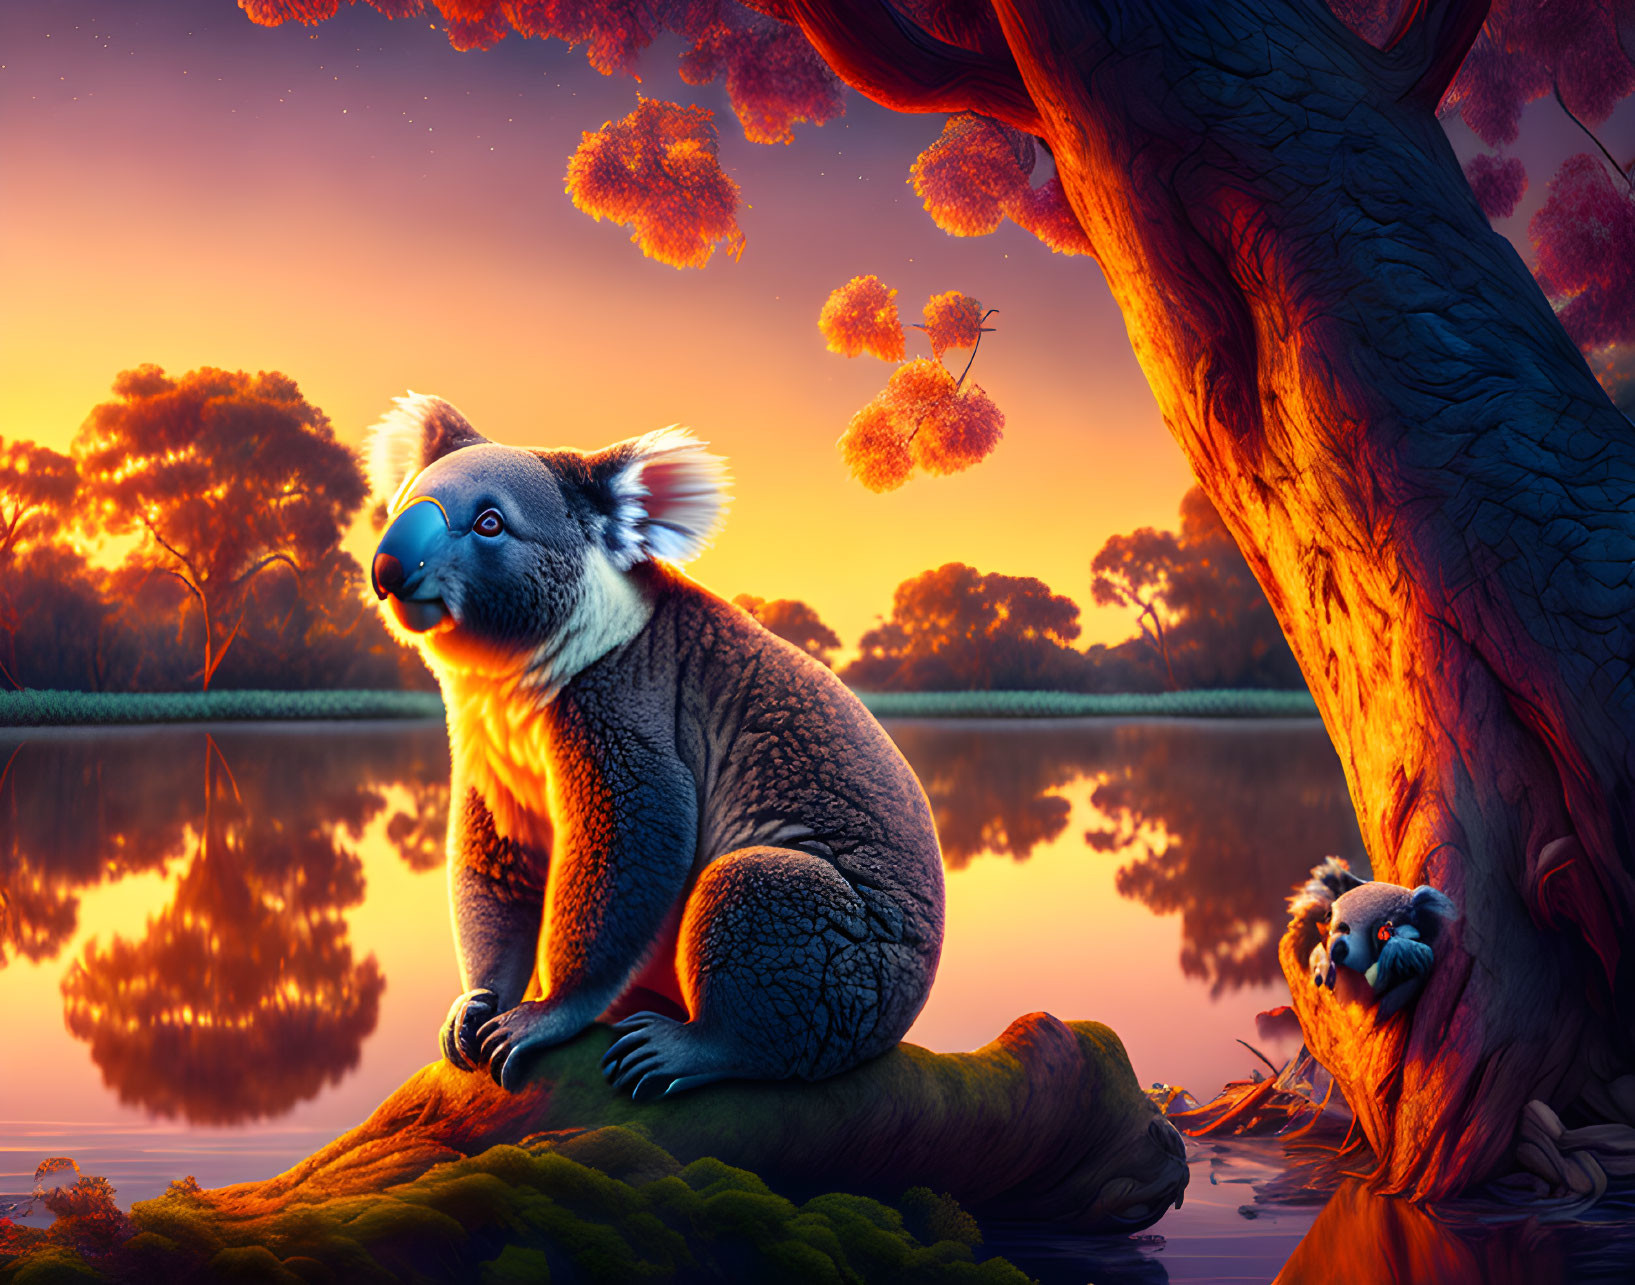 Koalas at sunset by tranquil lake with vibrant sky